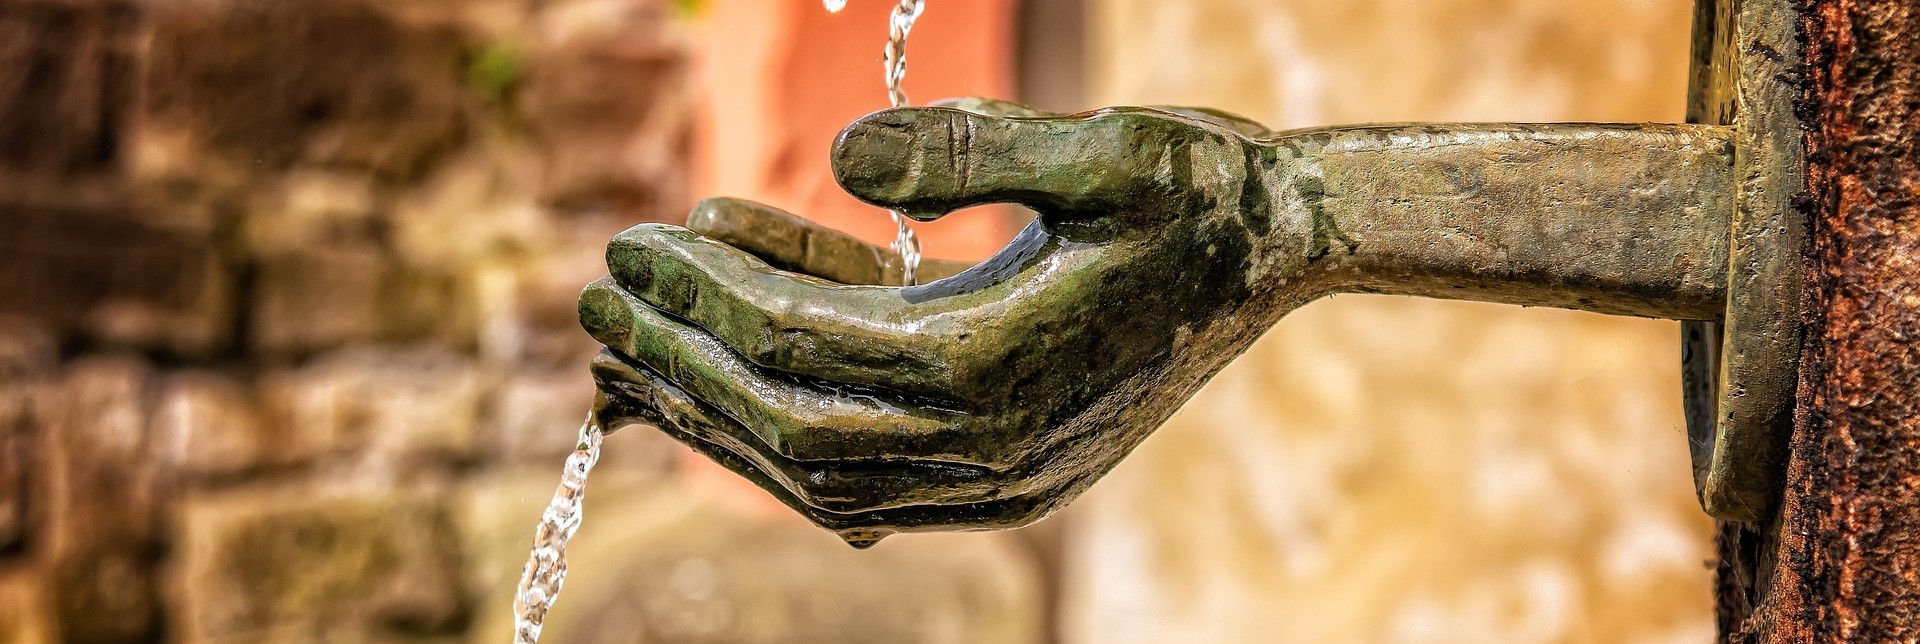 Refreshing water at a fountain with stone hands